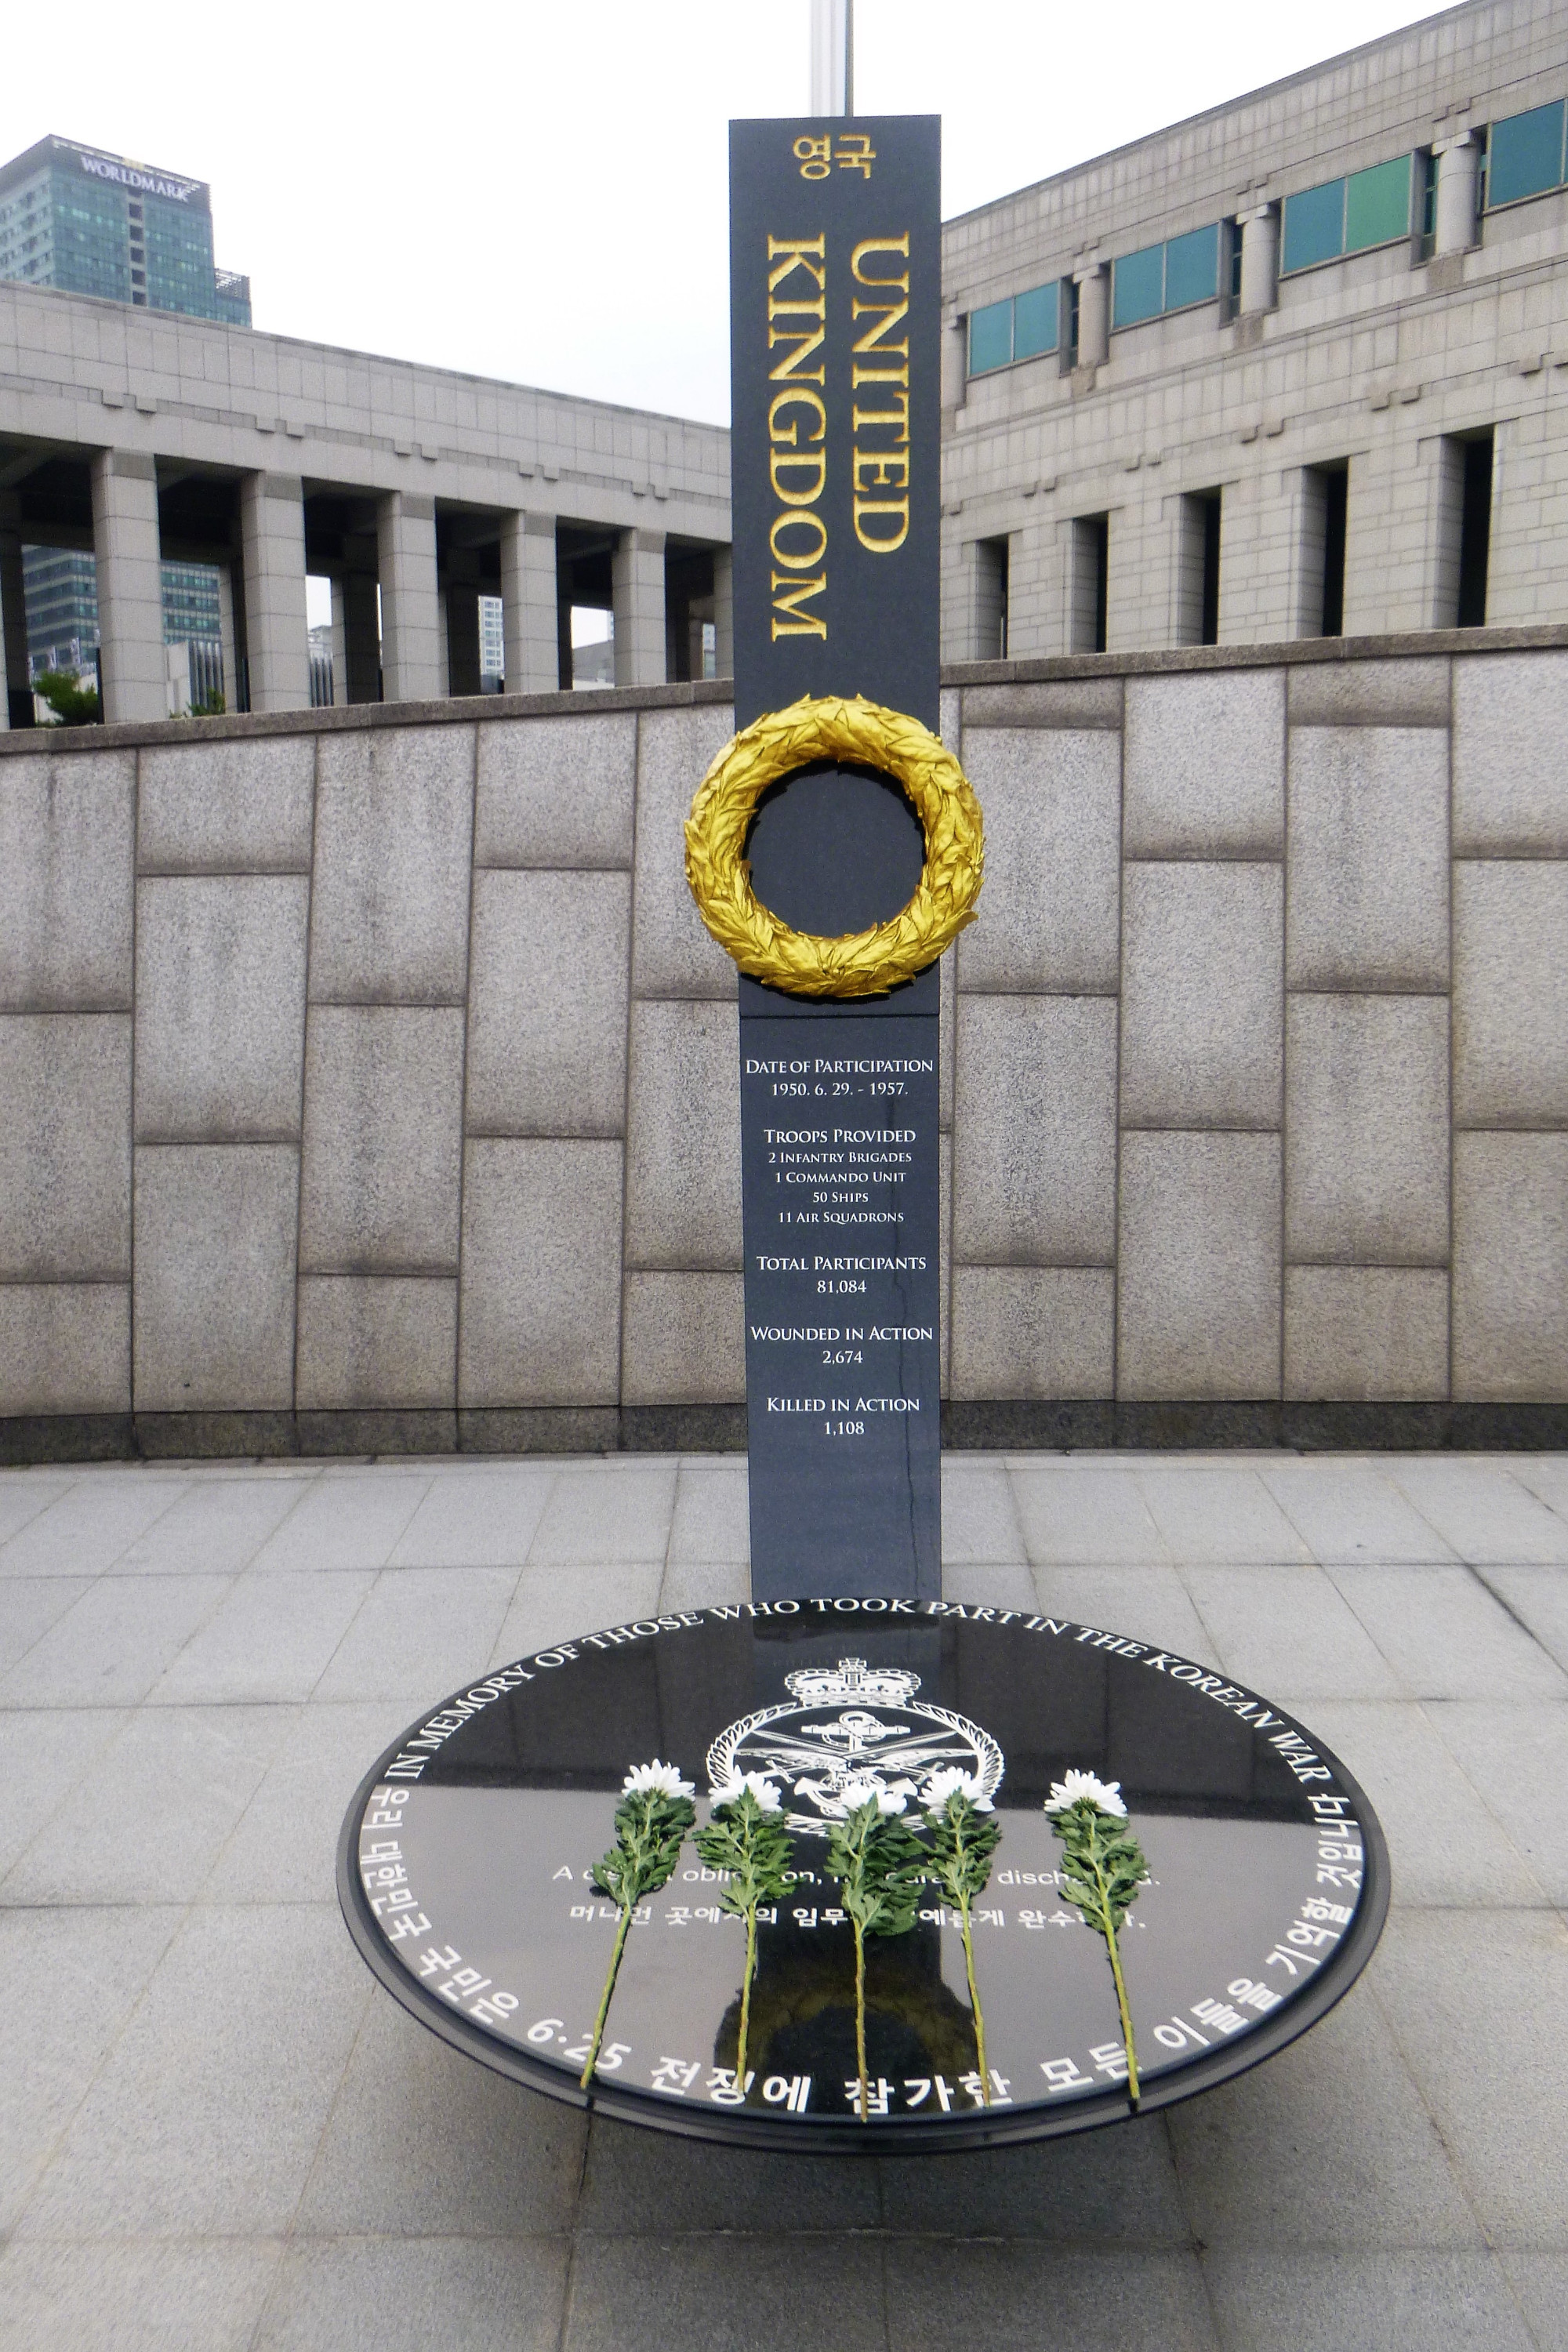 Memorial to the fallen each country (UK)